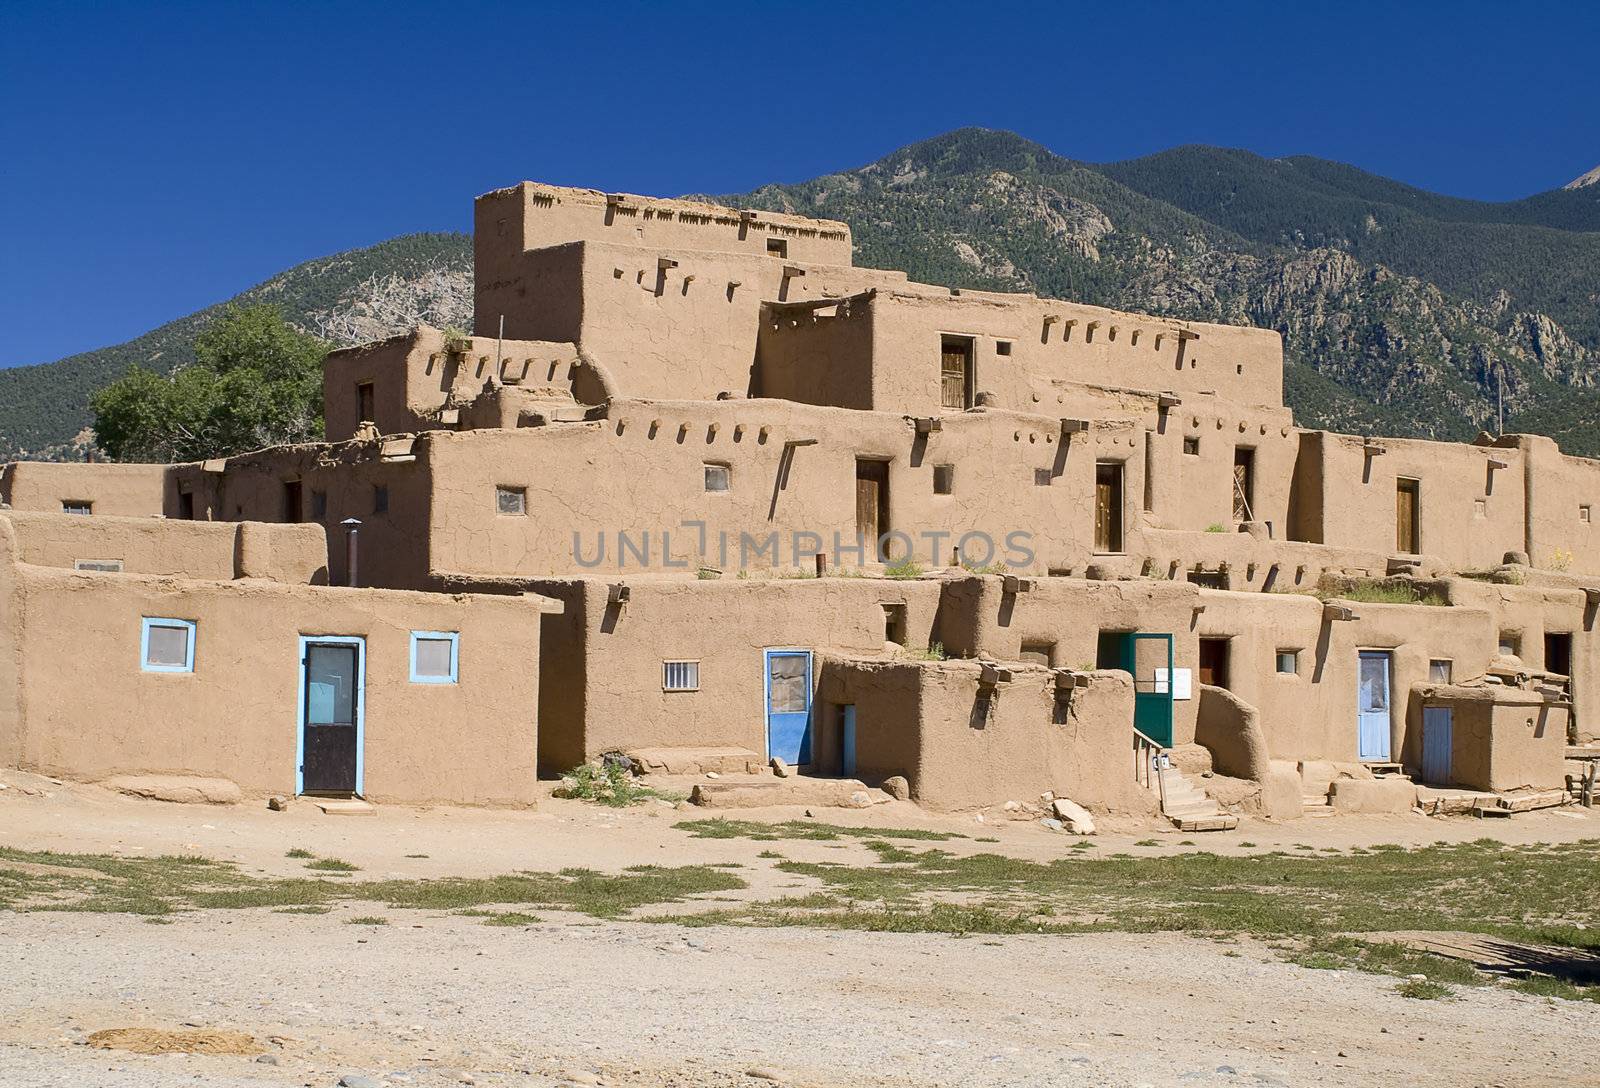 Adobe Houses in the Pueblo of Taos, New Mexico, USA. by diro